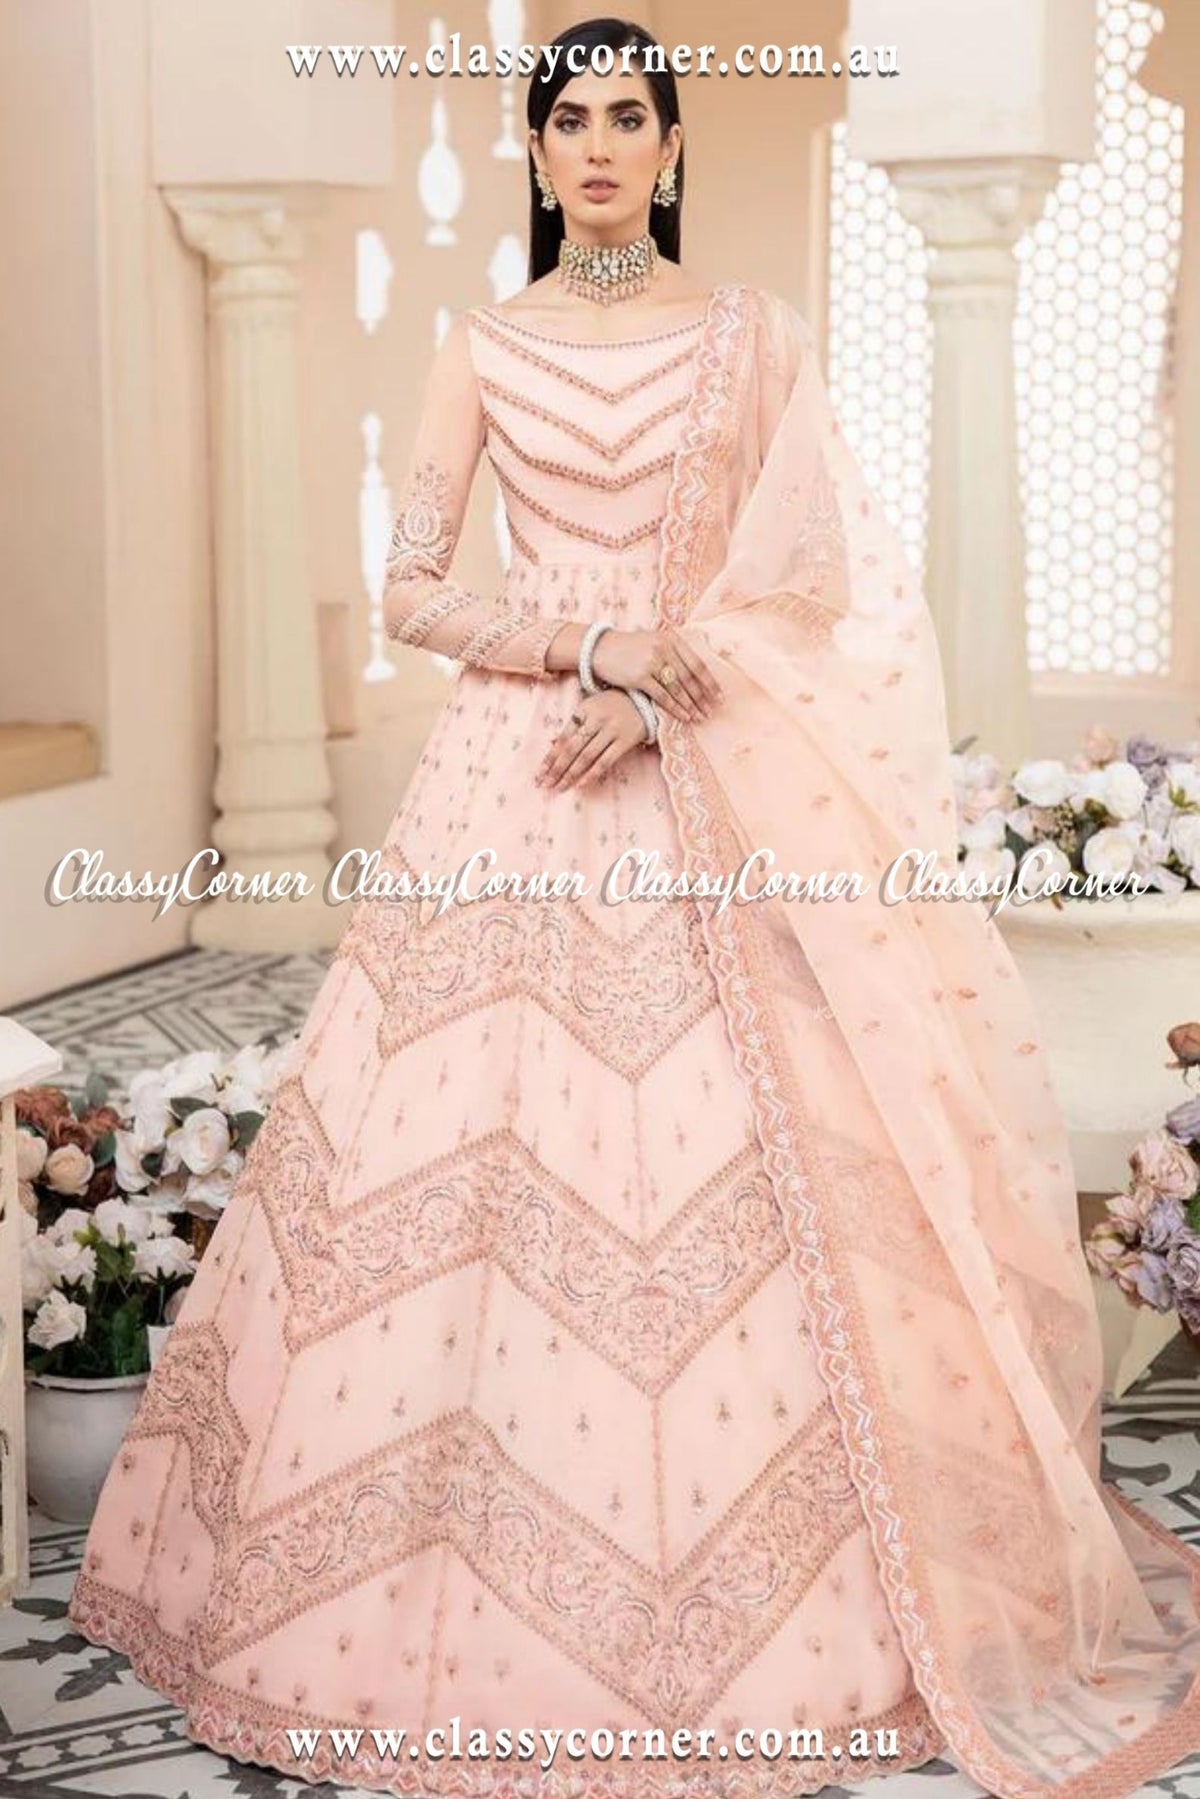 Regal Pink Organza Gown Outfit - Classy Corner